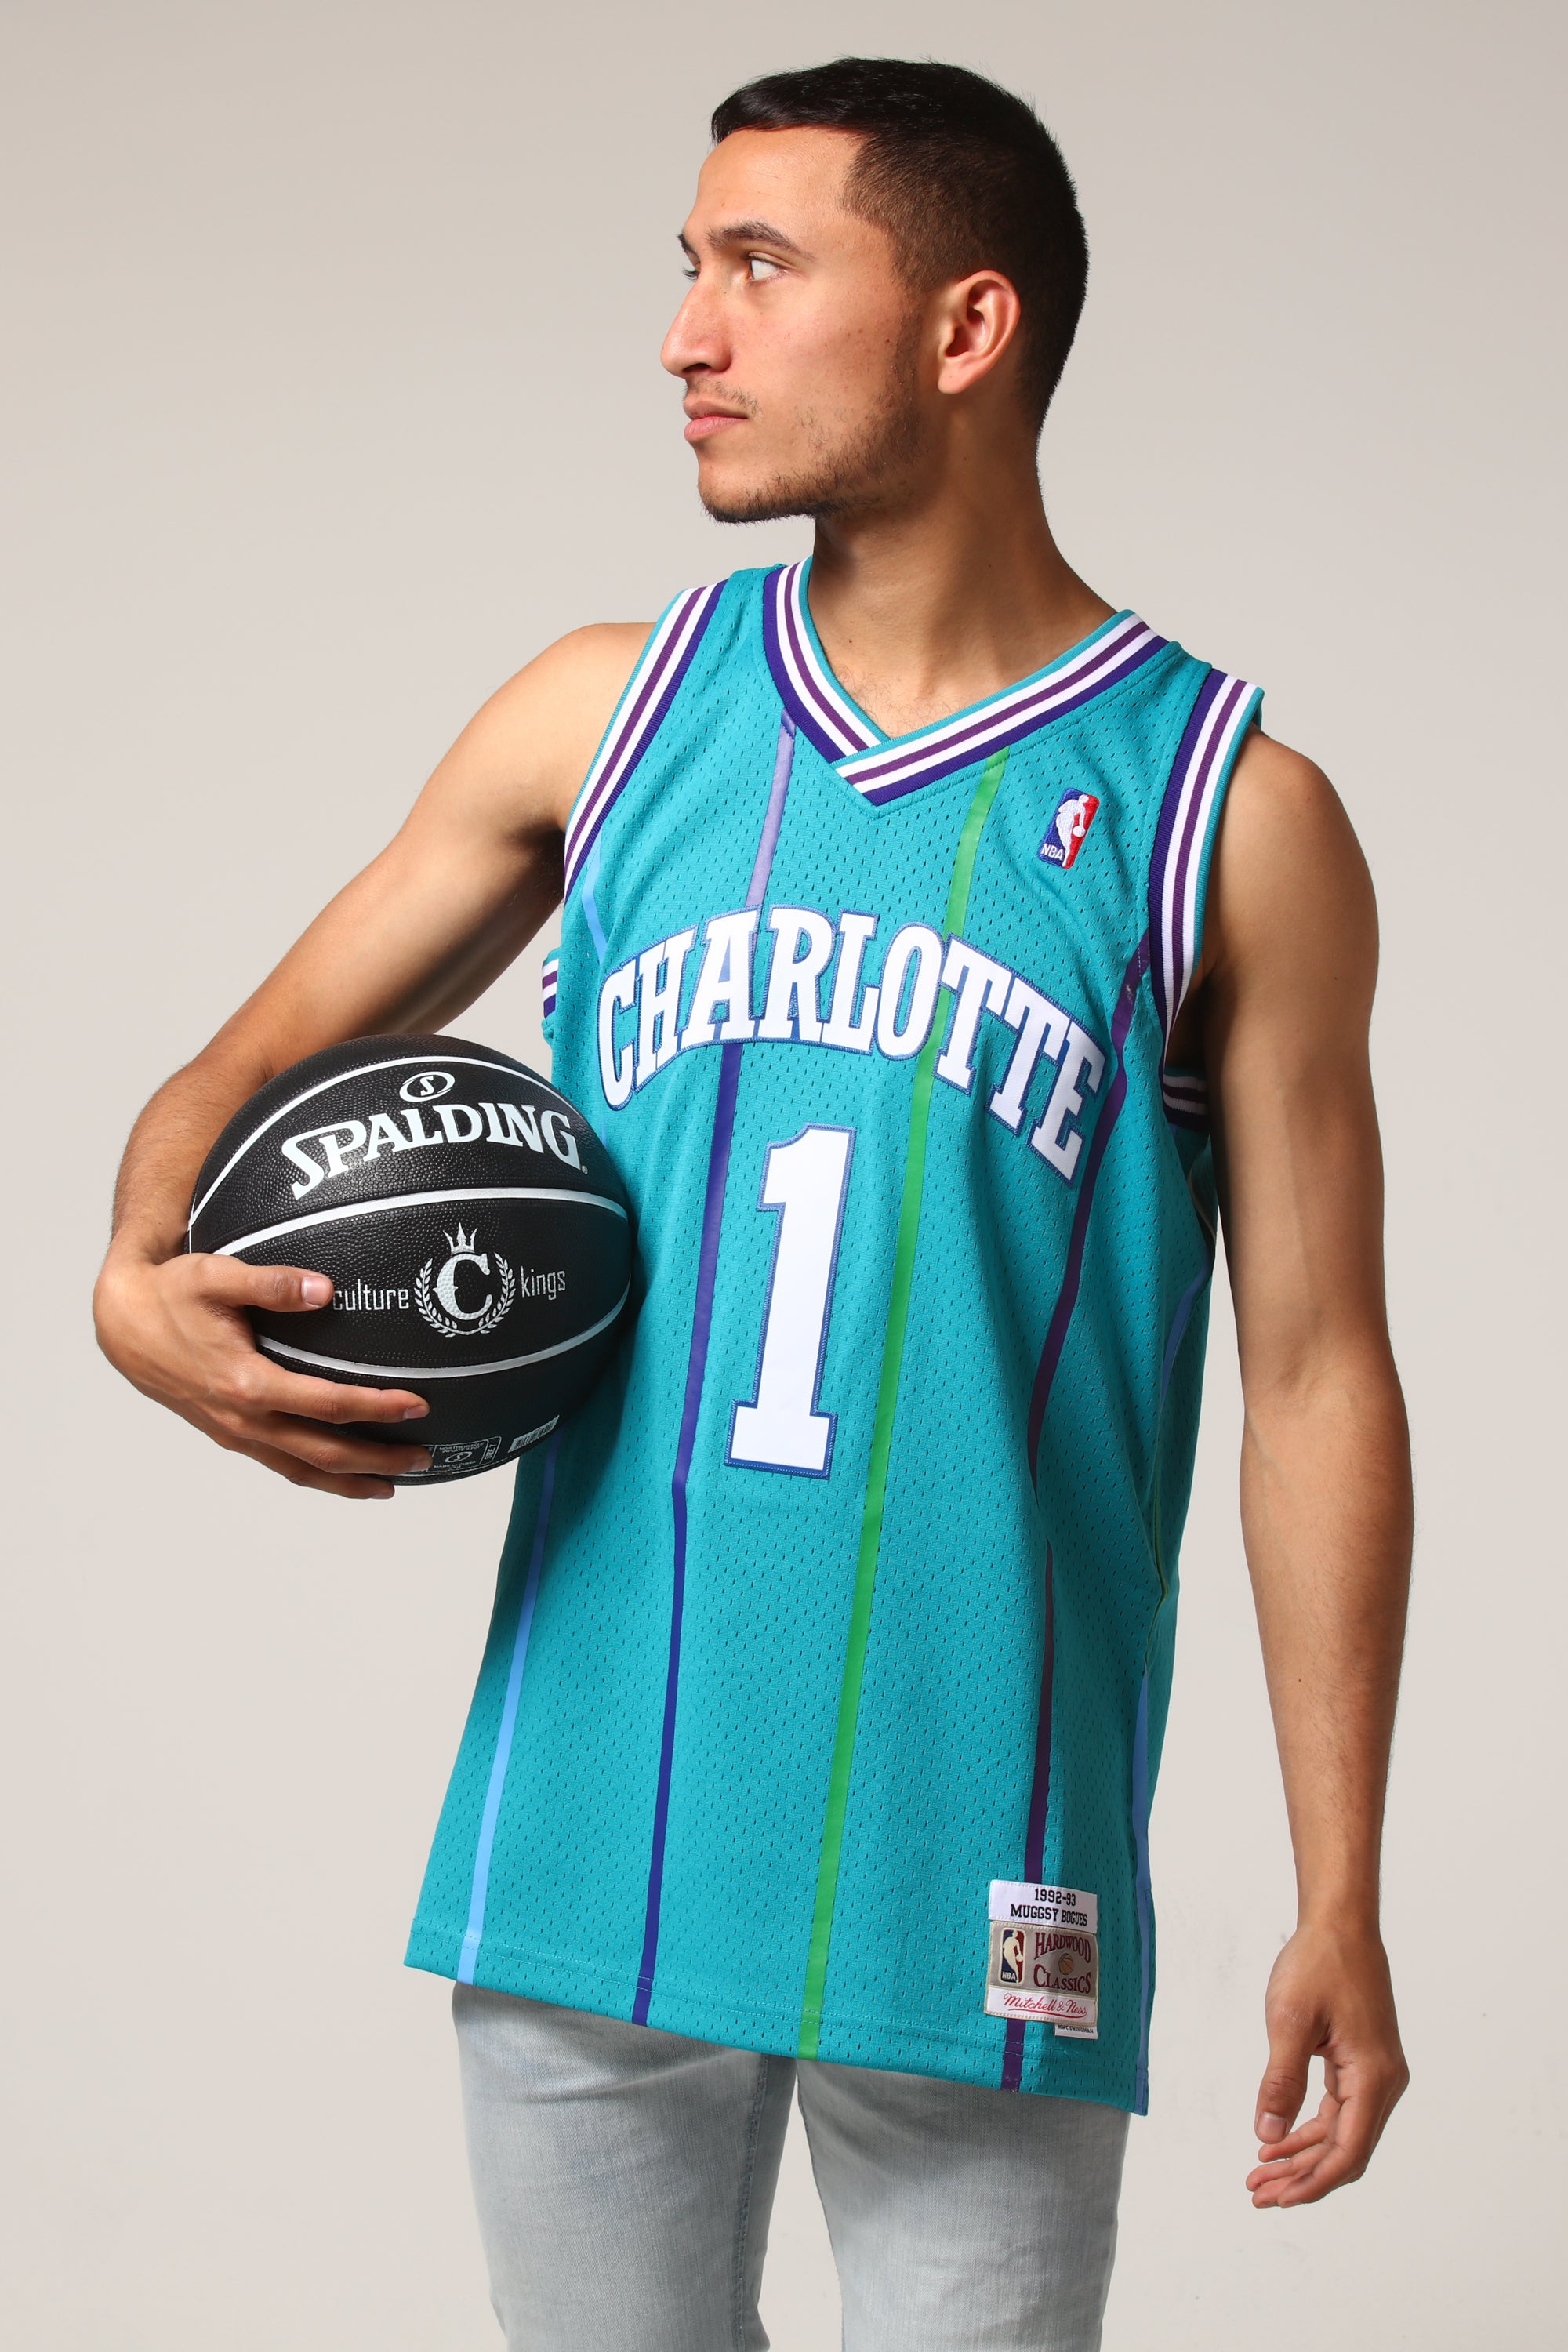 muggsy bogues jersey youth